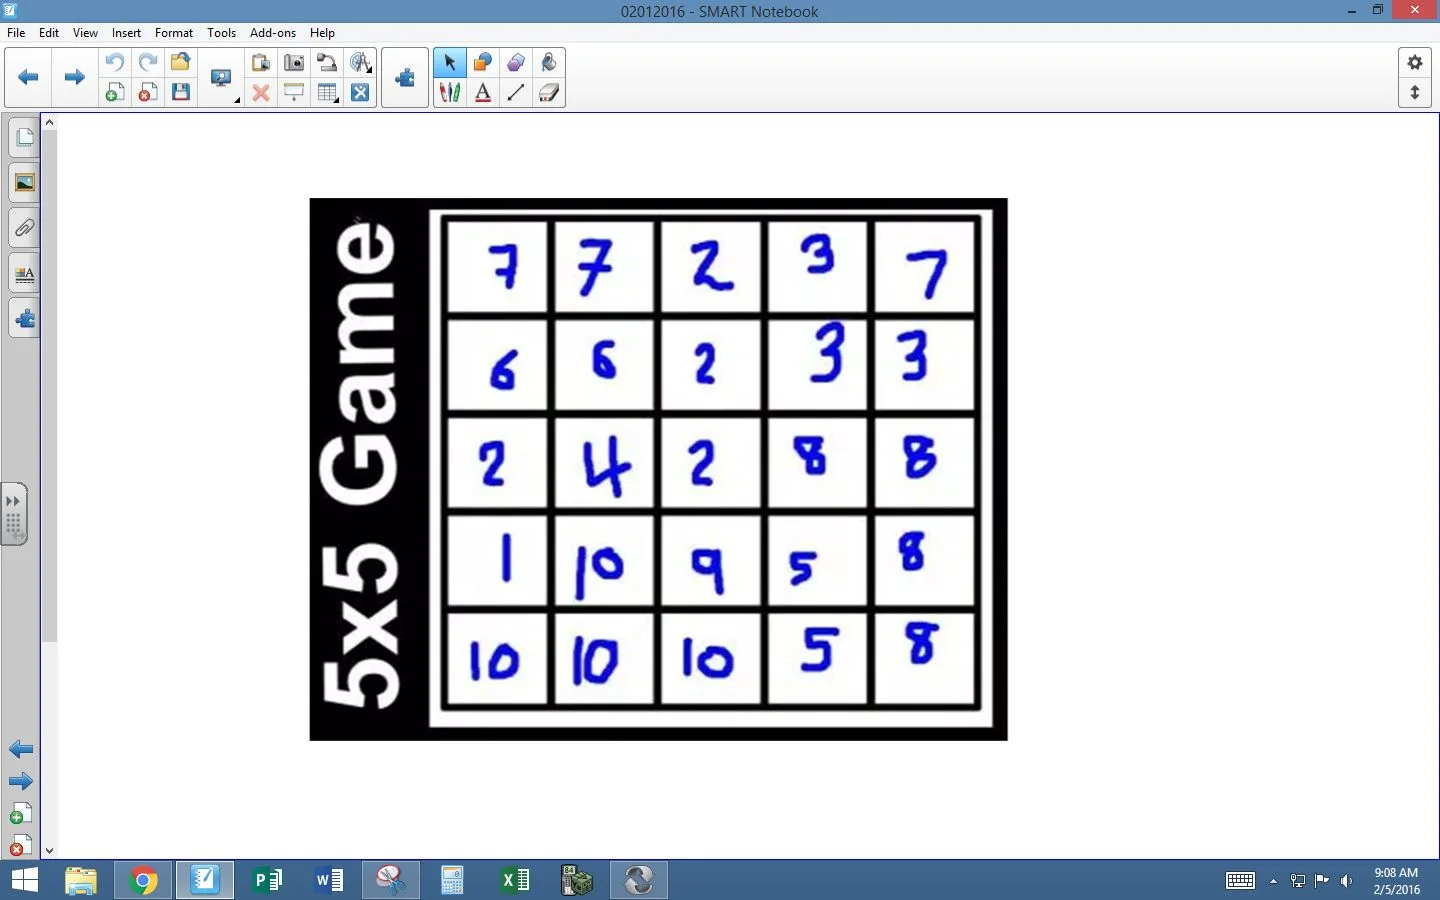 5 x 5 Game Explanation on Smartboard